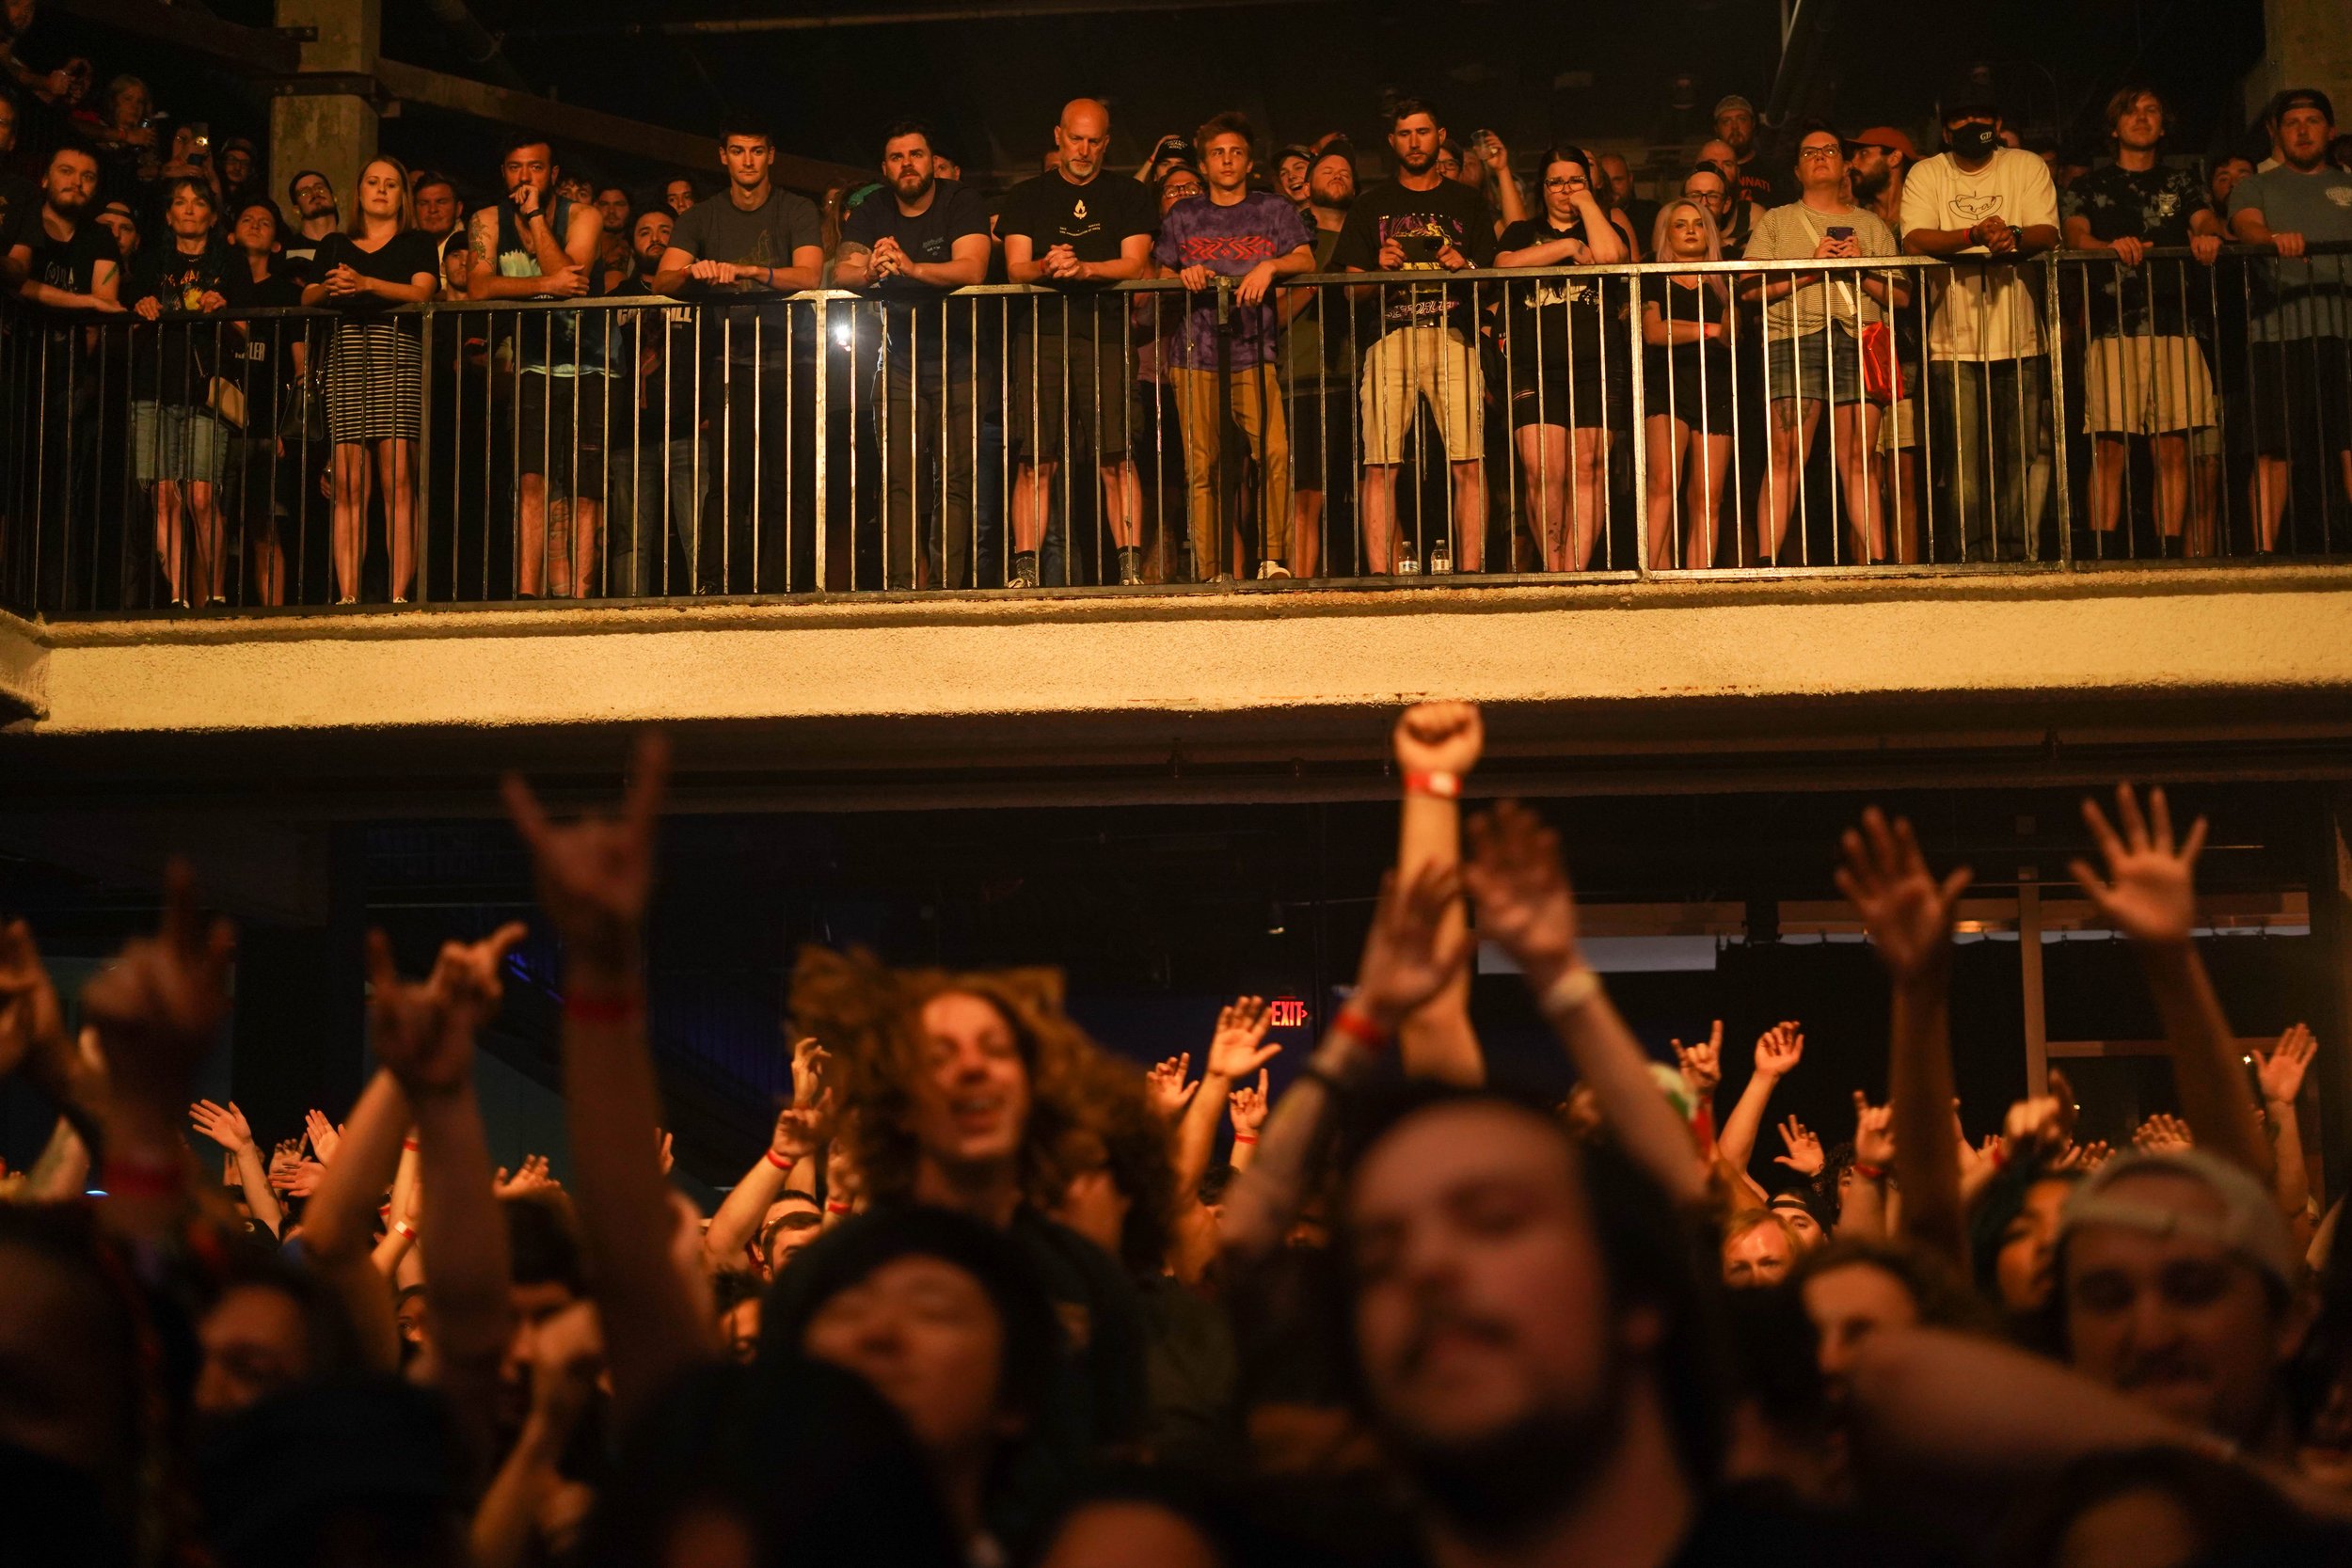 The crowd piled in for Invent Animate at The Masquerade